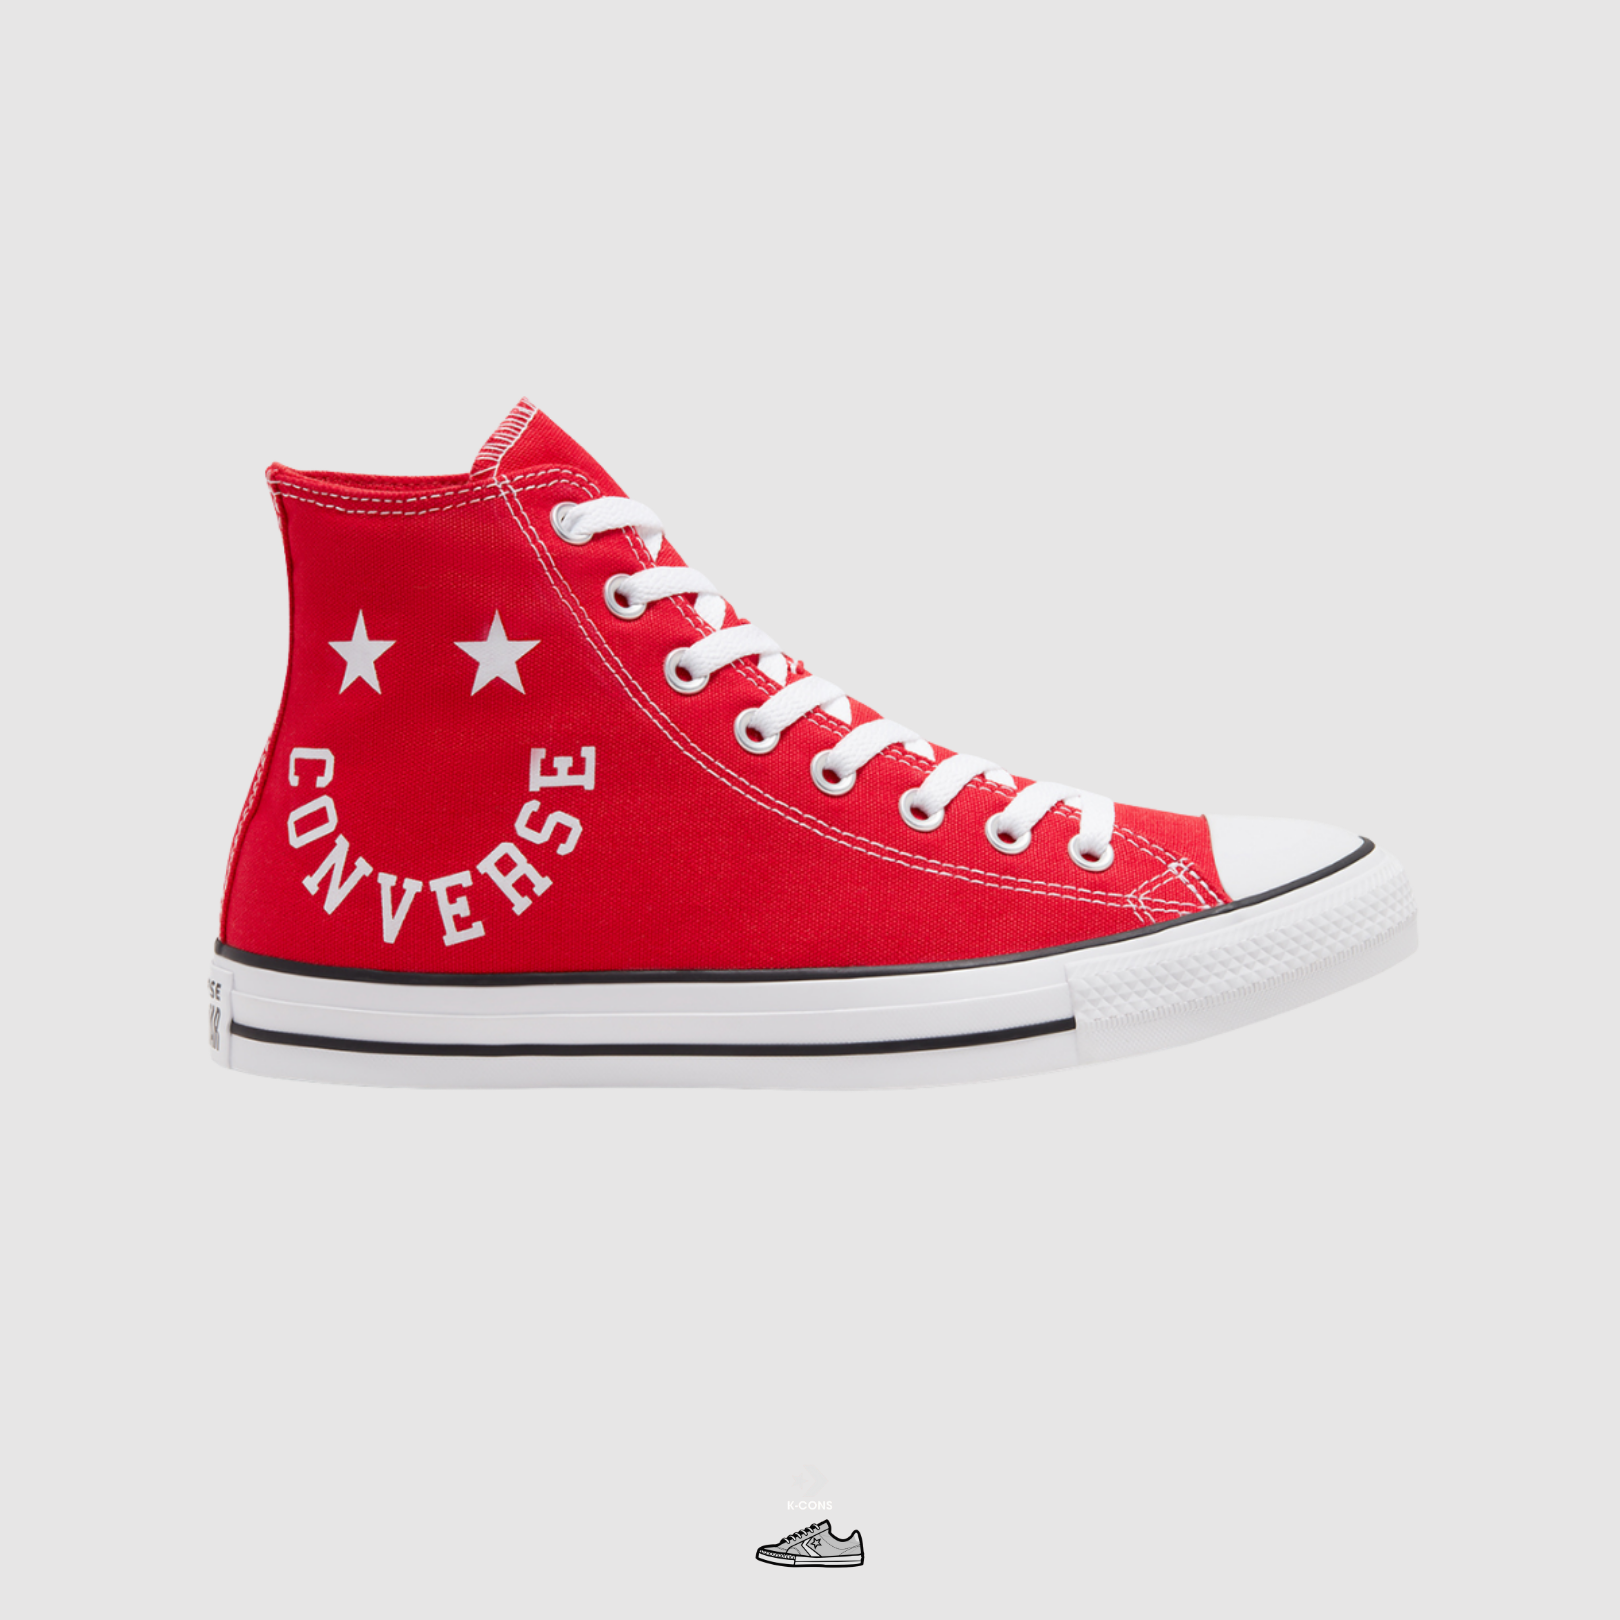  Giày Converse Chuck Taylor All Star Classic Cheerful Red High Top 167069C 